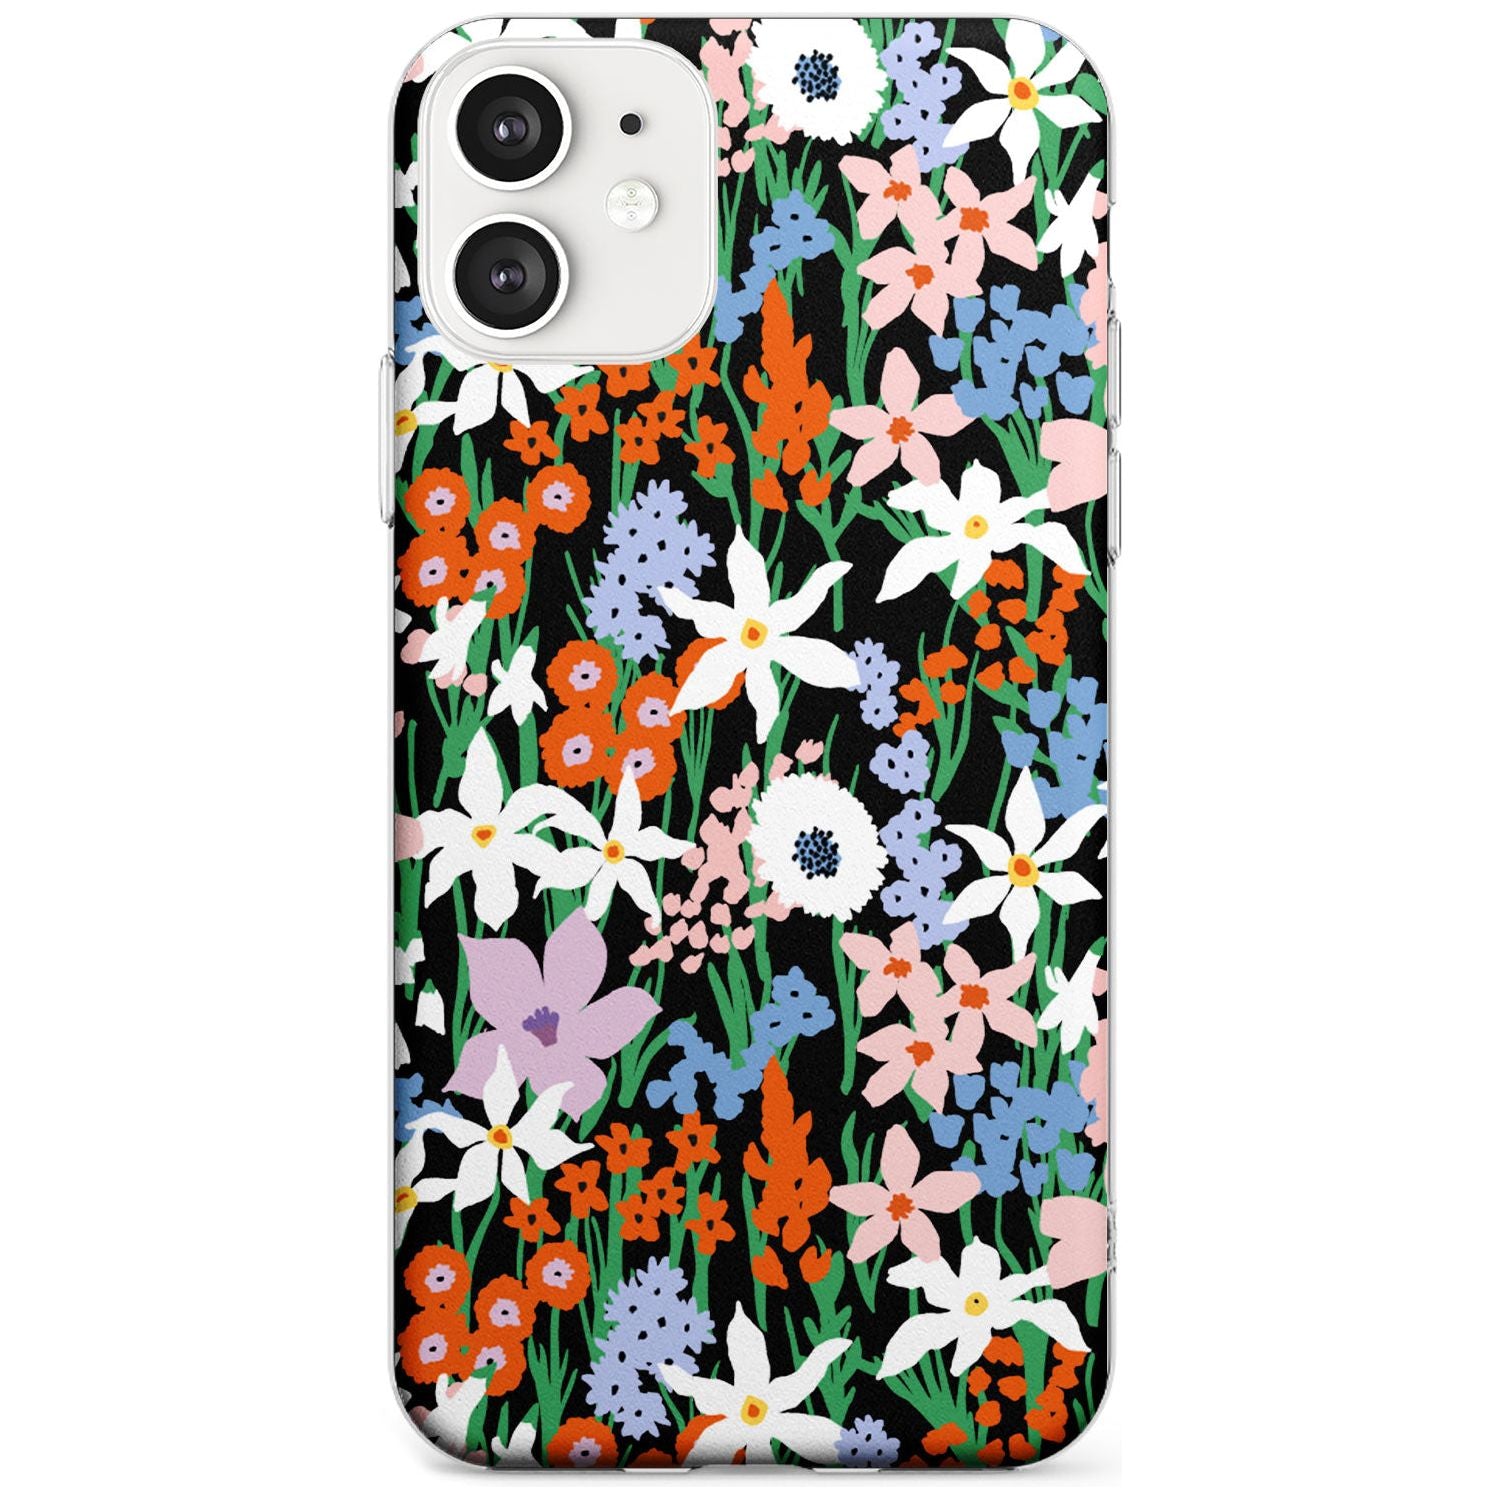 Springtime Meadow: Solid Black Impact Phone Case for iPhone 11